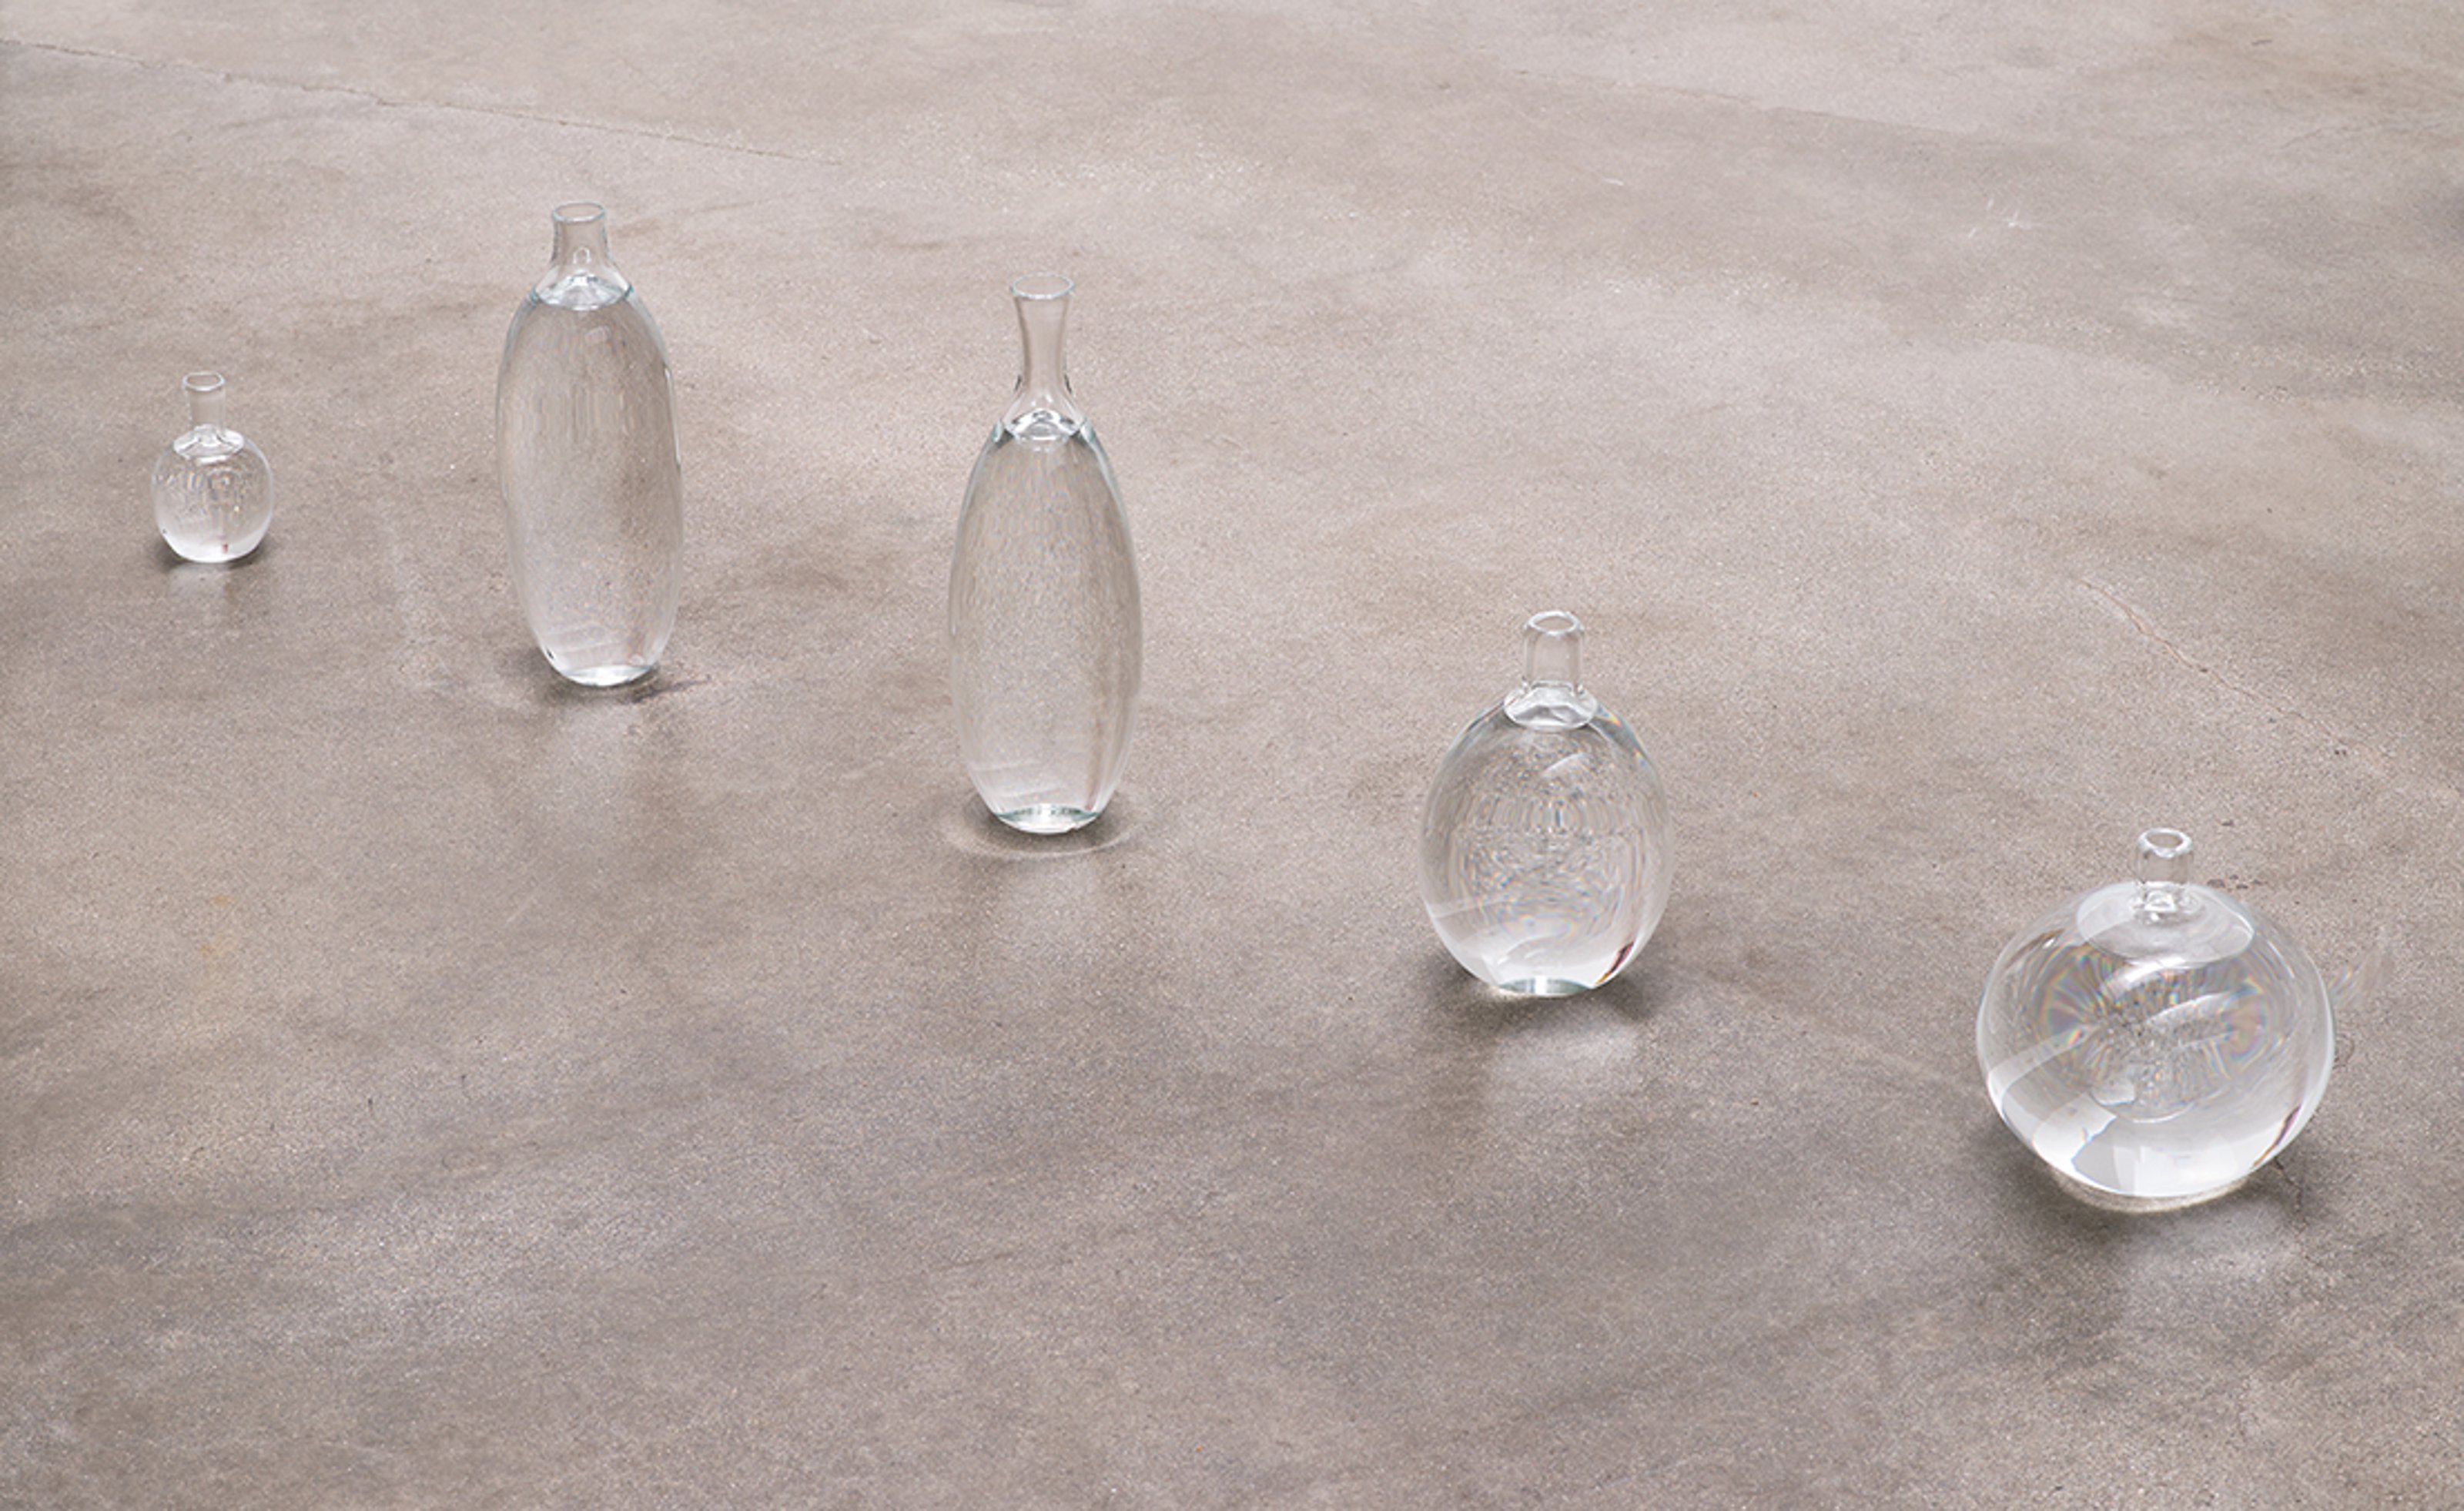 Glass bottles filled with water of various sizes installed in a line on the ground